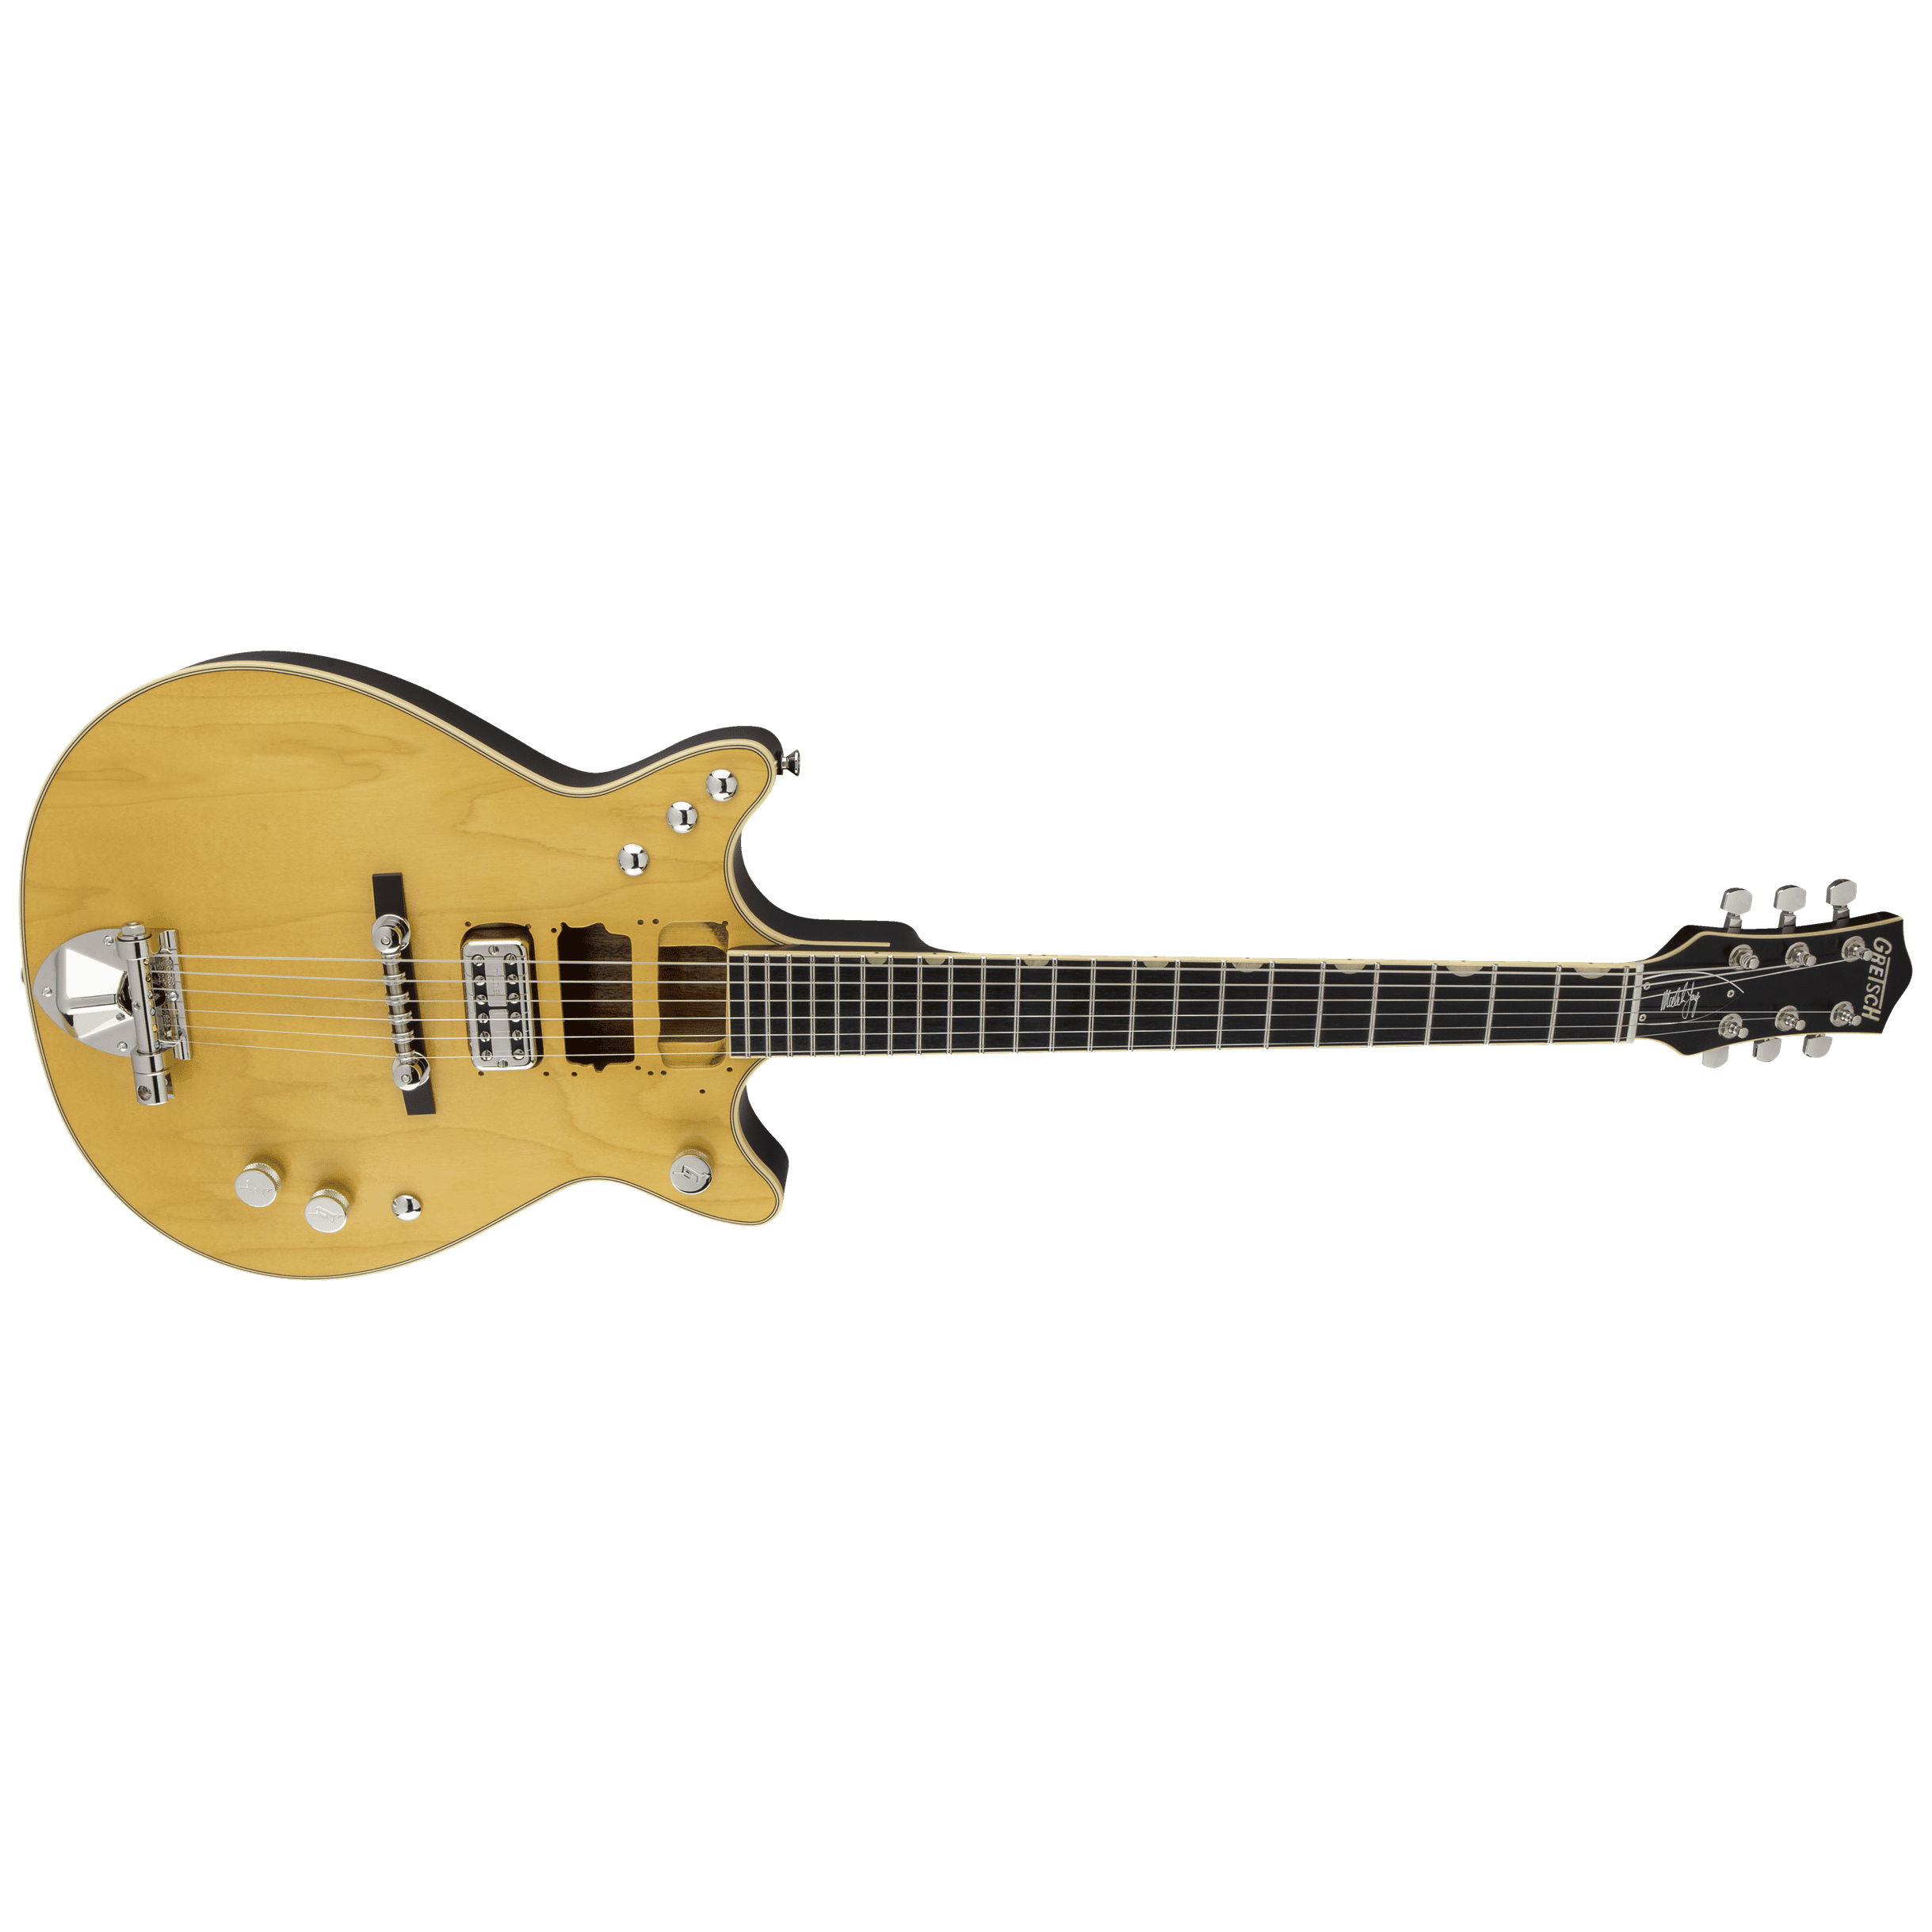 Gretsch G6131-MY Malcolm Young Signature Jet EB NAT 3